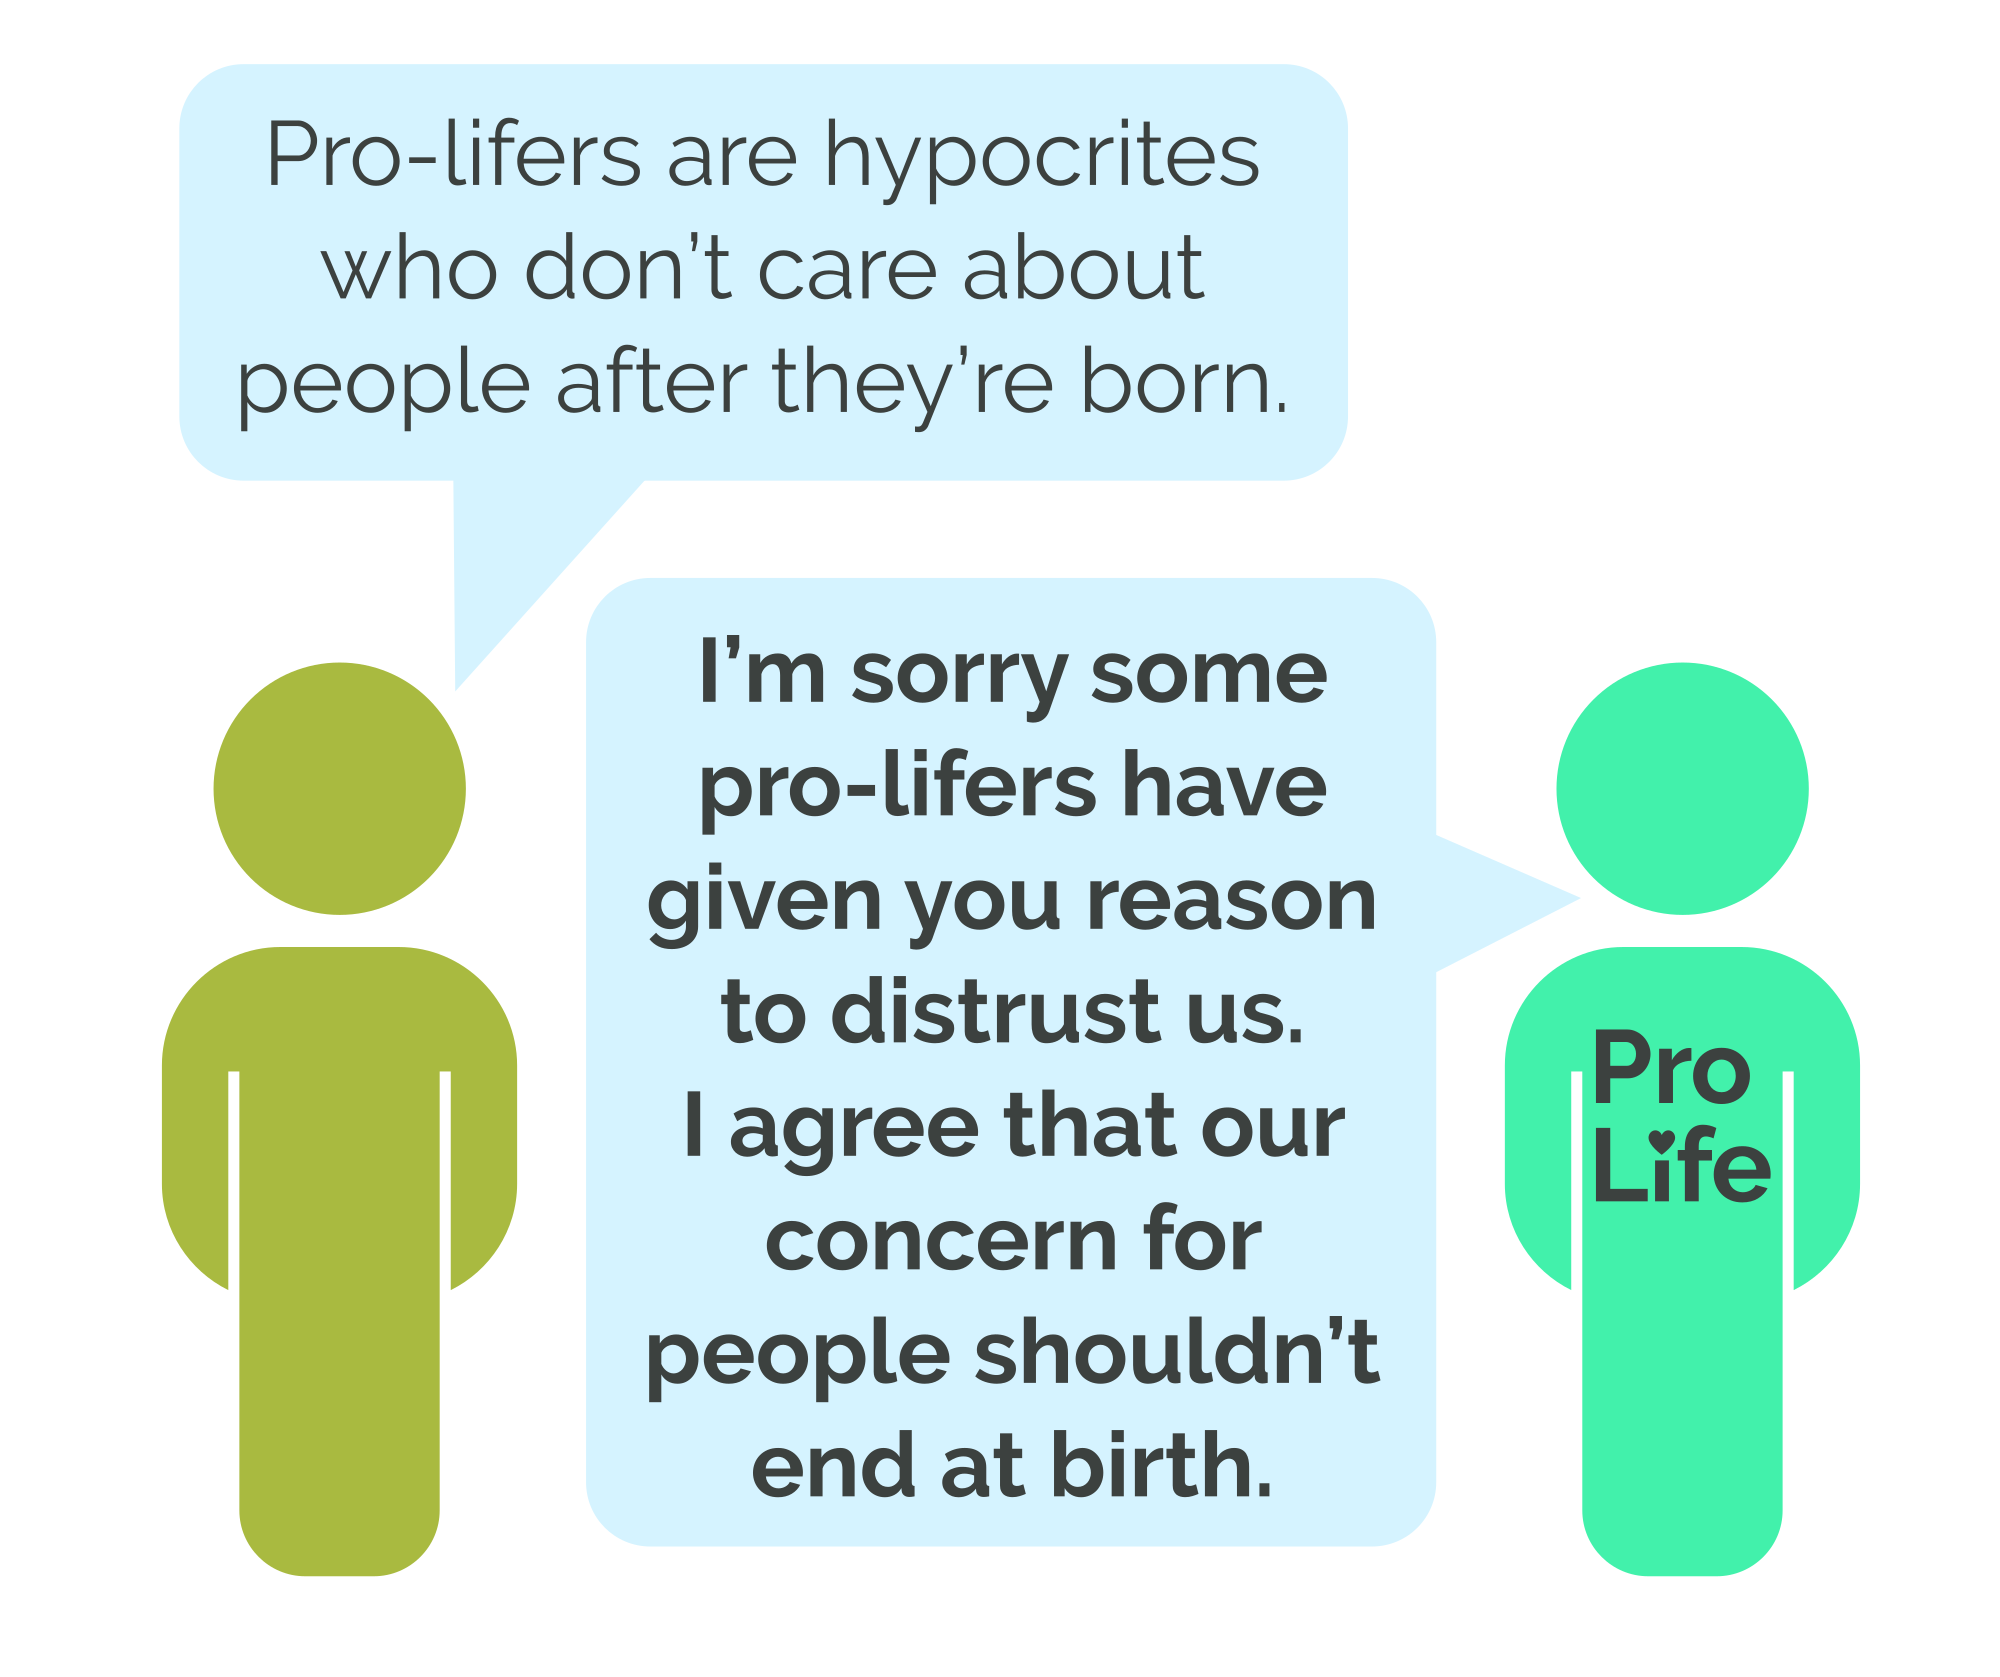 Person 1: Pro-lifers are hypocrites who don’t care about people after they’re born. Person 2 (our hero): I’m sorry some pro-lifers have given you reason to distrust us. I agree that our concern for people shouldn’t end at birth.